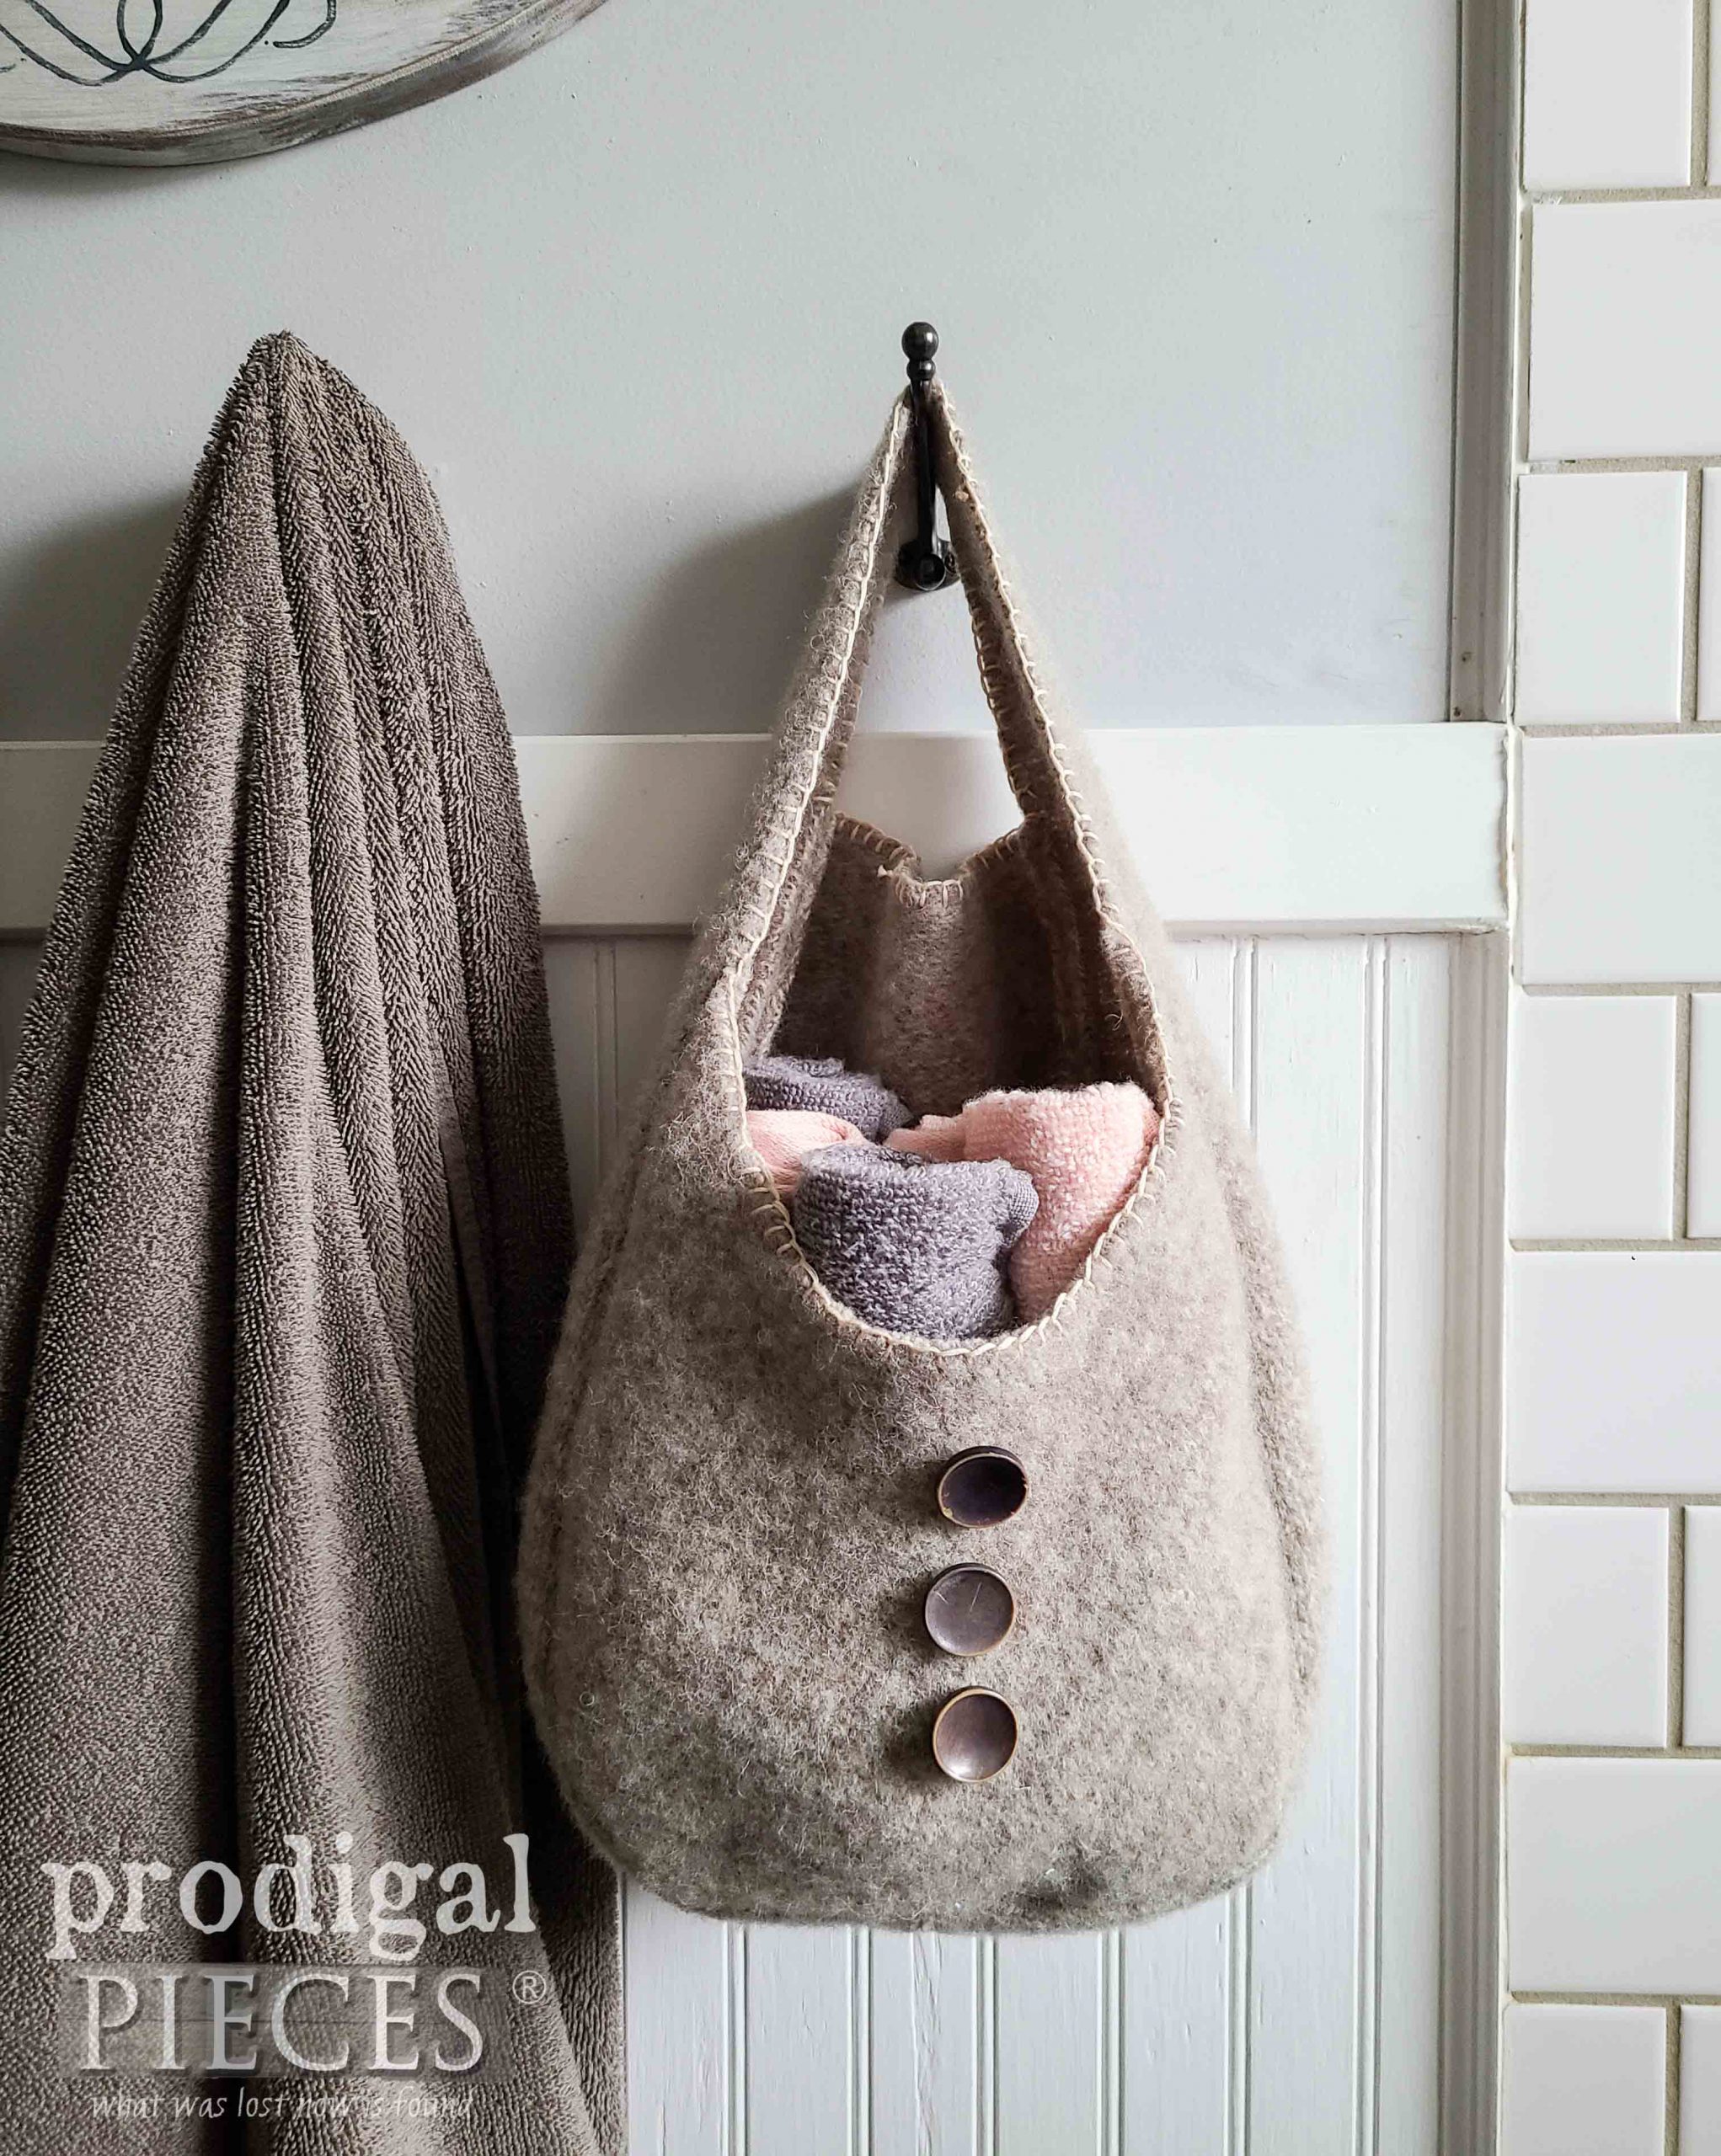 Felted Wool Hanging Basket ~ Several Choices available at Prodigal Pieces | shop.prodigalpieces.com #prodigalpieces #shopping #giftidea #handmade #style #fashion